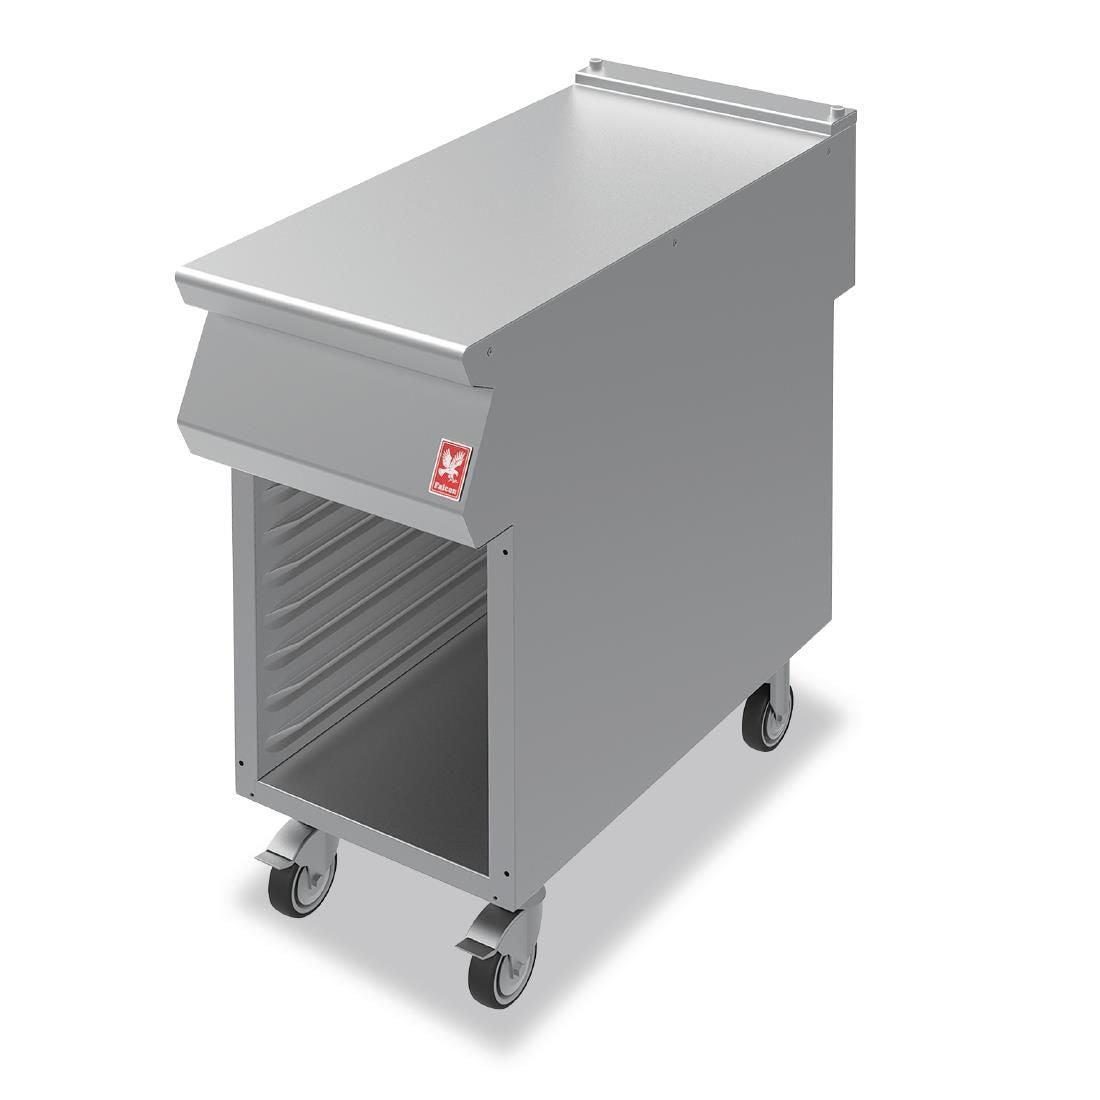 Falcon F900 Open Cabinet With Pressed Runners on Castors JD Catering Equipment Solutions Ltd